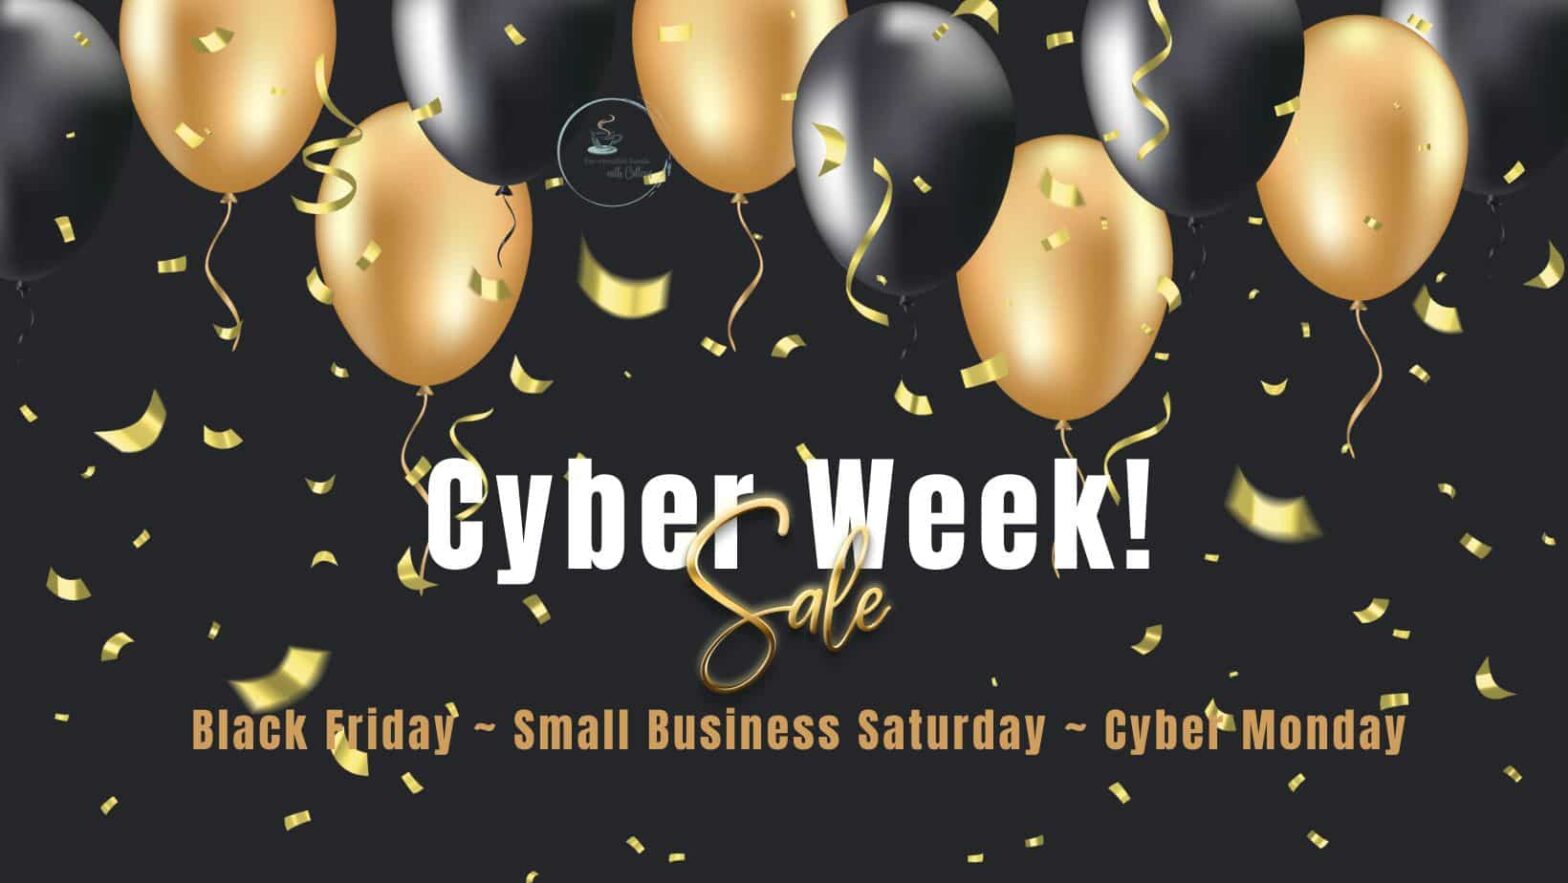 a black background with gold ballons that says cyber week sale and black friday-small business saturday-cyber monday. Let Cyber Week Sales begin!